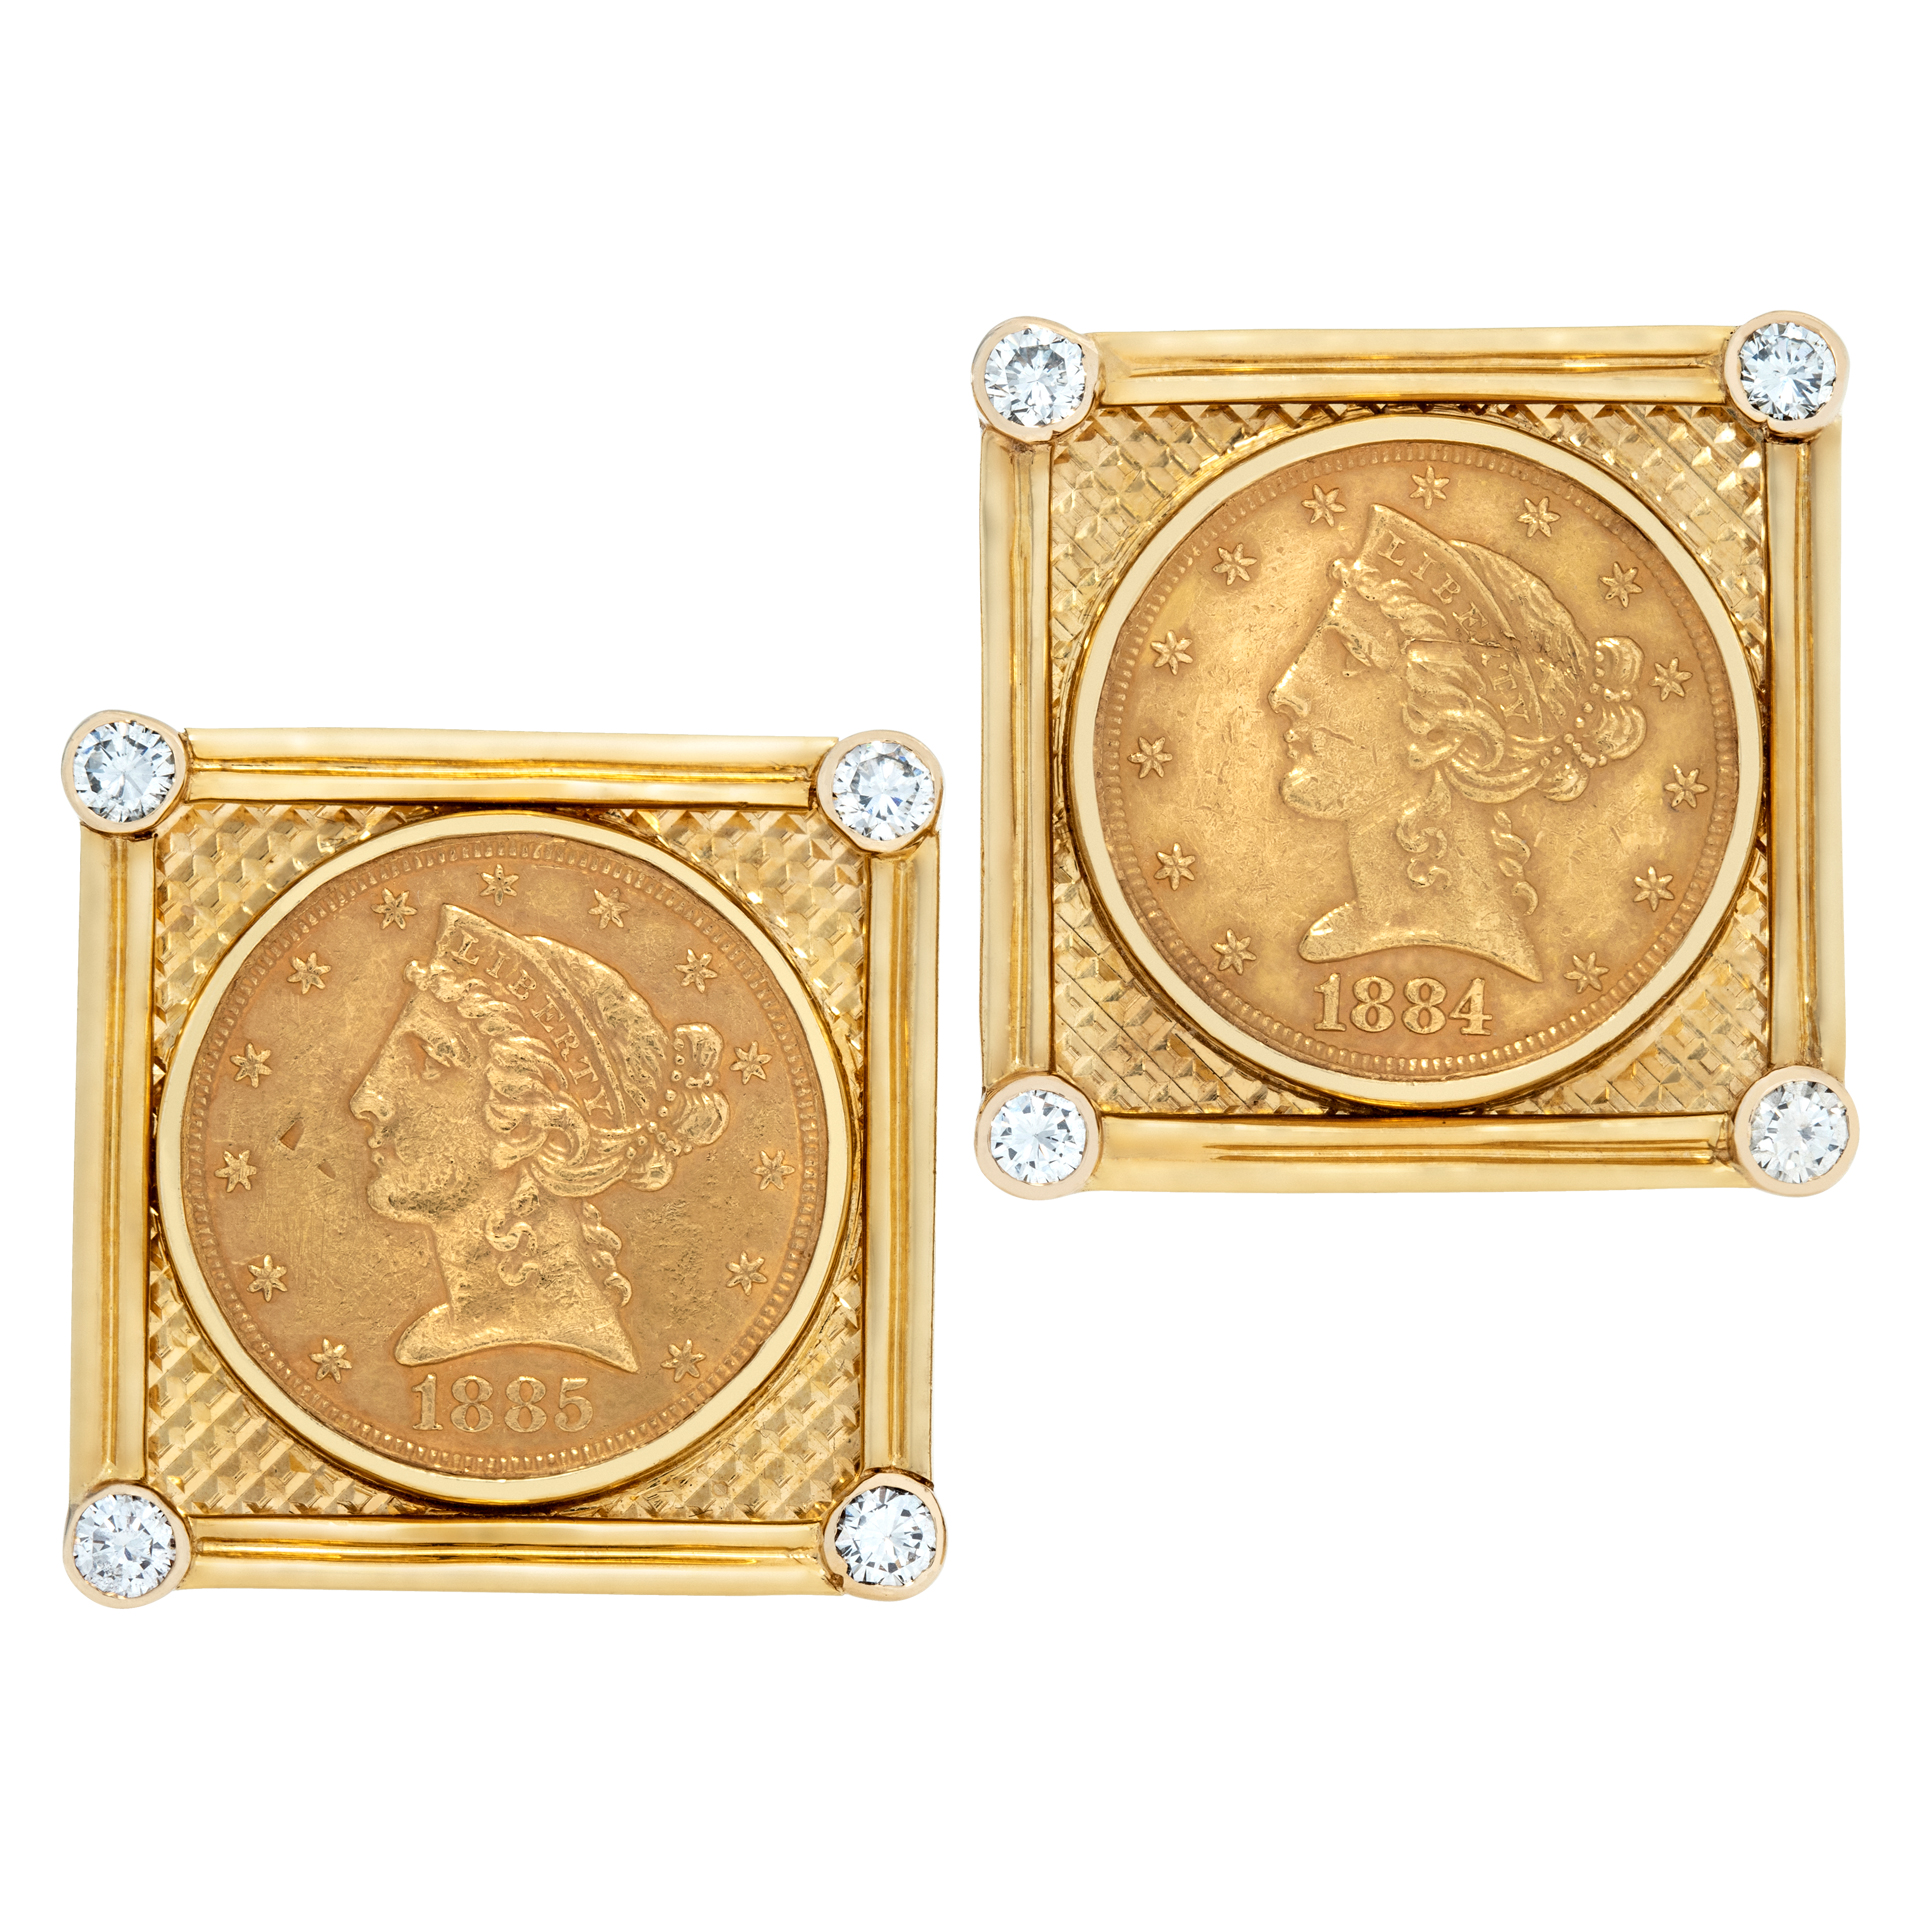 Earrings US gold coin in 18k with diamond accents image 1